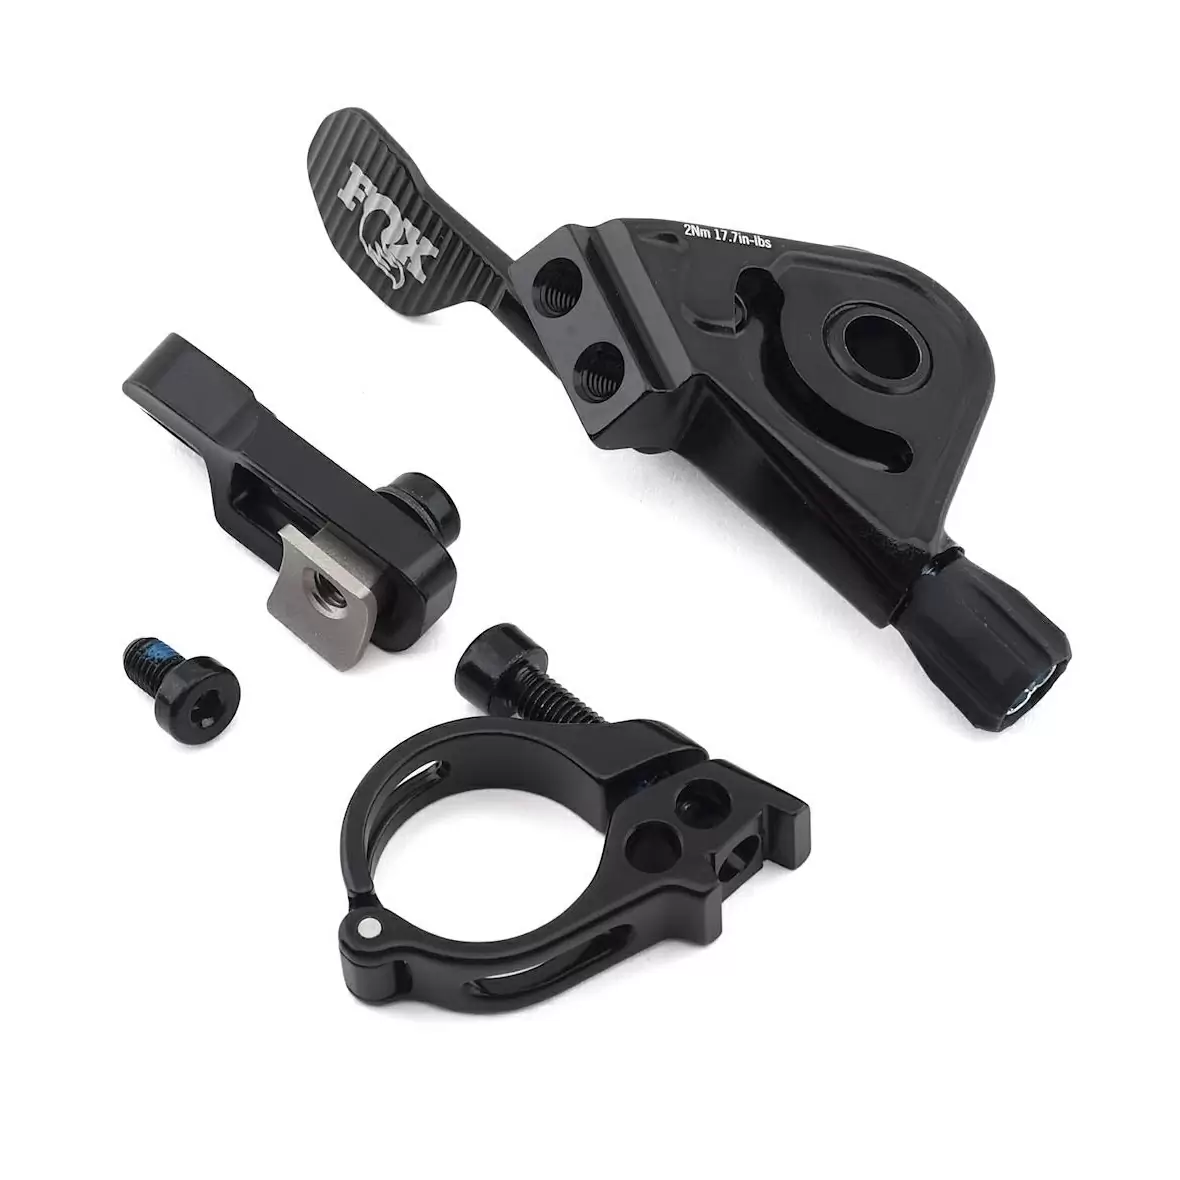 Remote lever for transfer seatpost 1x with collar and Matchmaker X - Sram and I-Spec EV - image